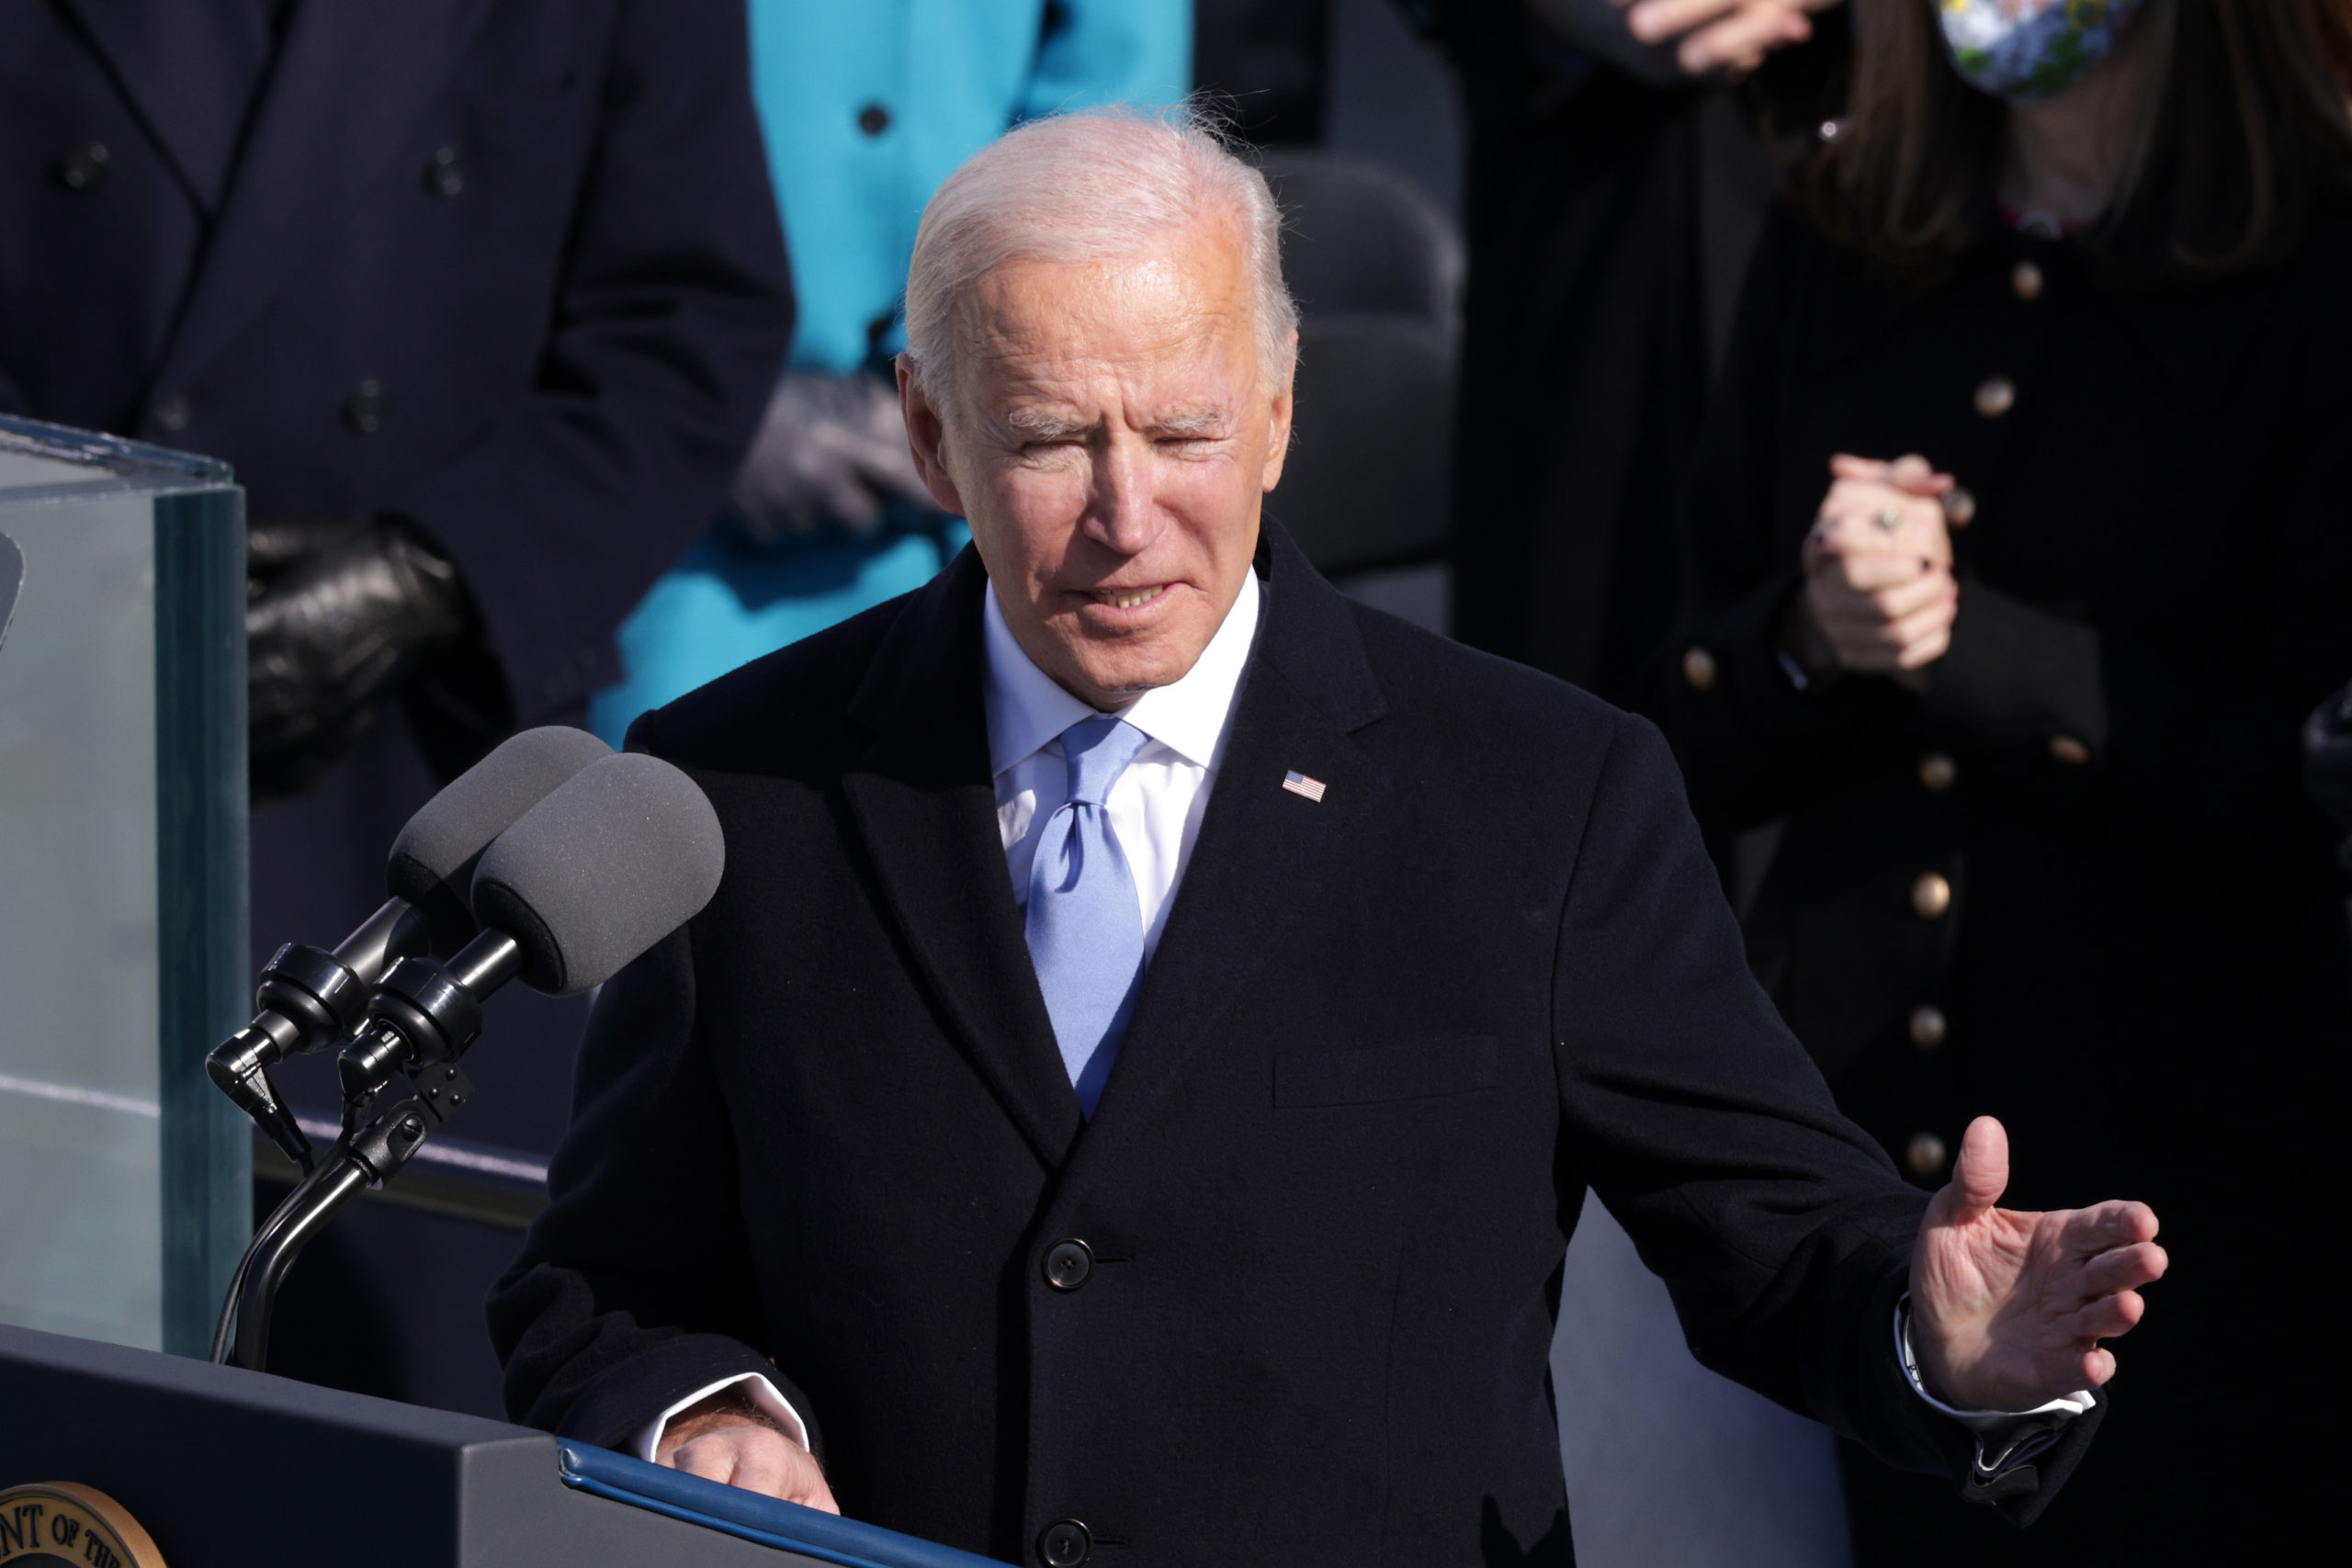 WASHINGTON, DC - JANUARY 20: U.S. President Joe Biden delivers his inaugural address on the West Front of the U.S. Capitol on January 20, 2021 in Washington, DC. During today's inauguration ceremony Joe Biden becomes the 46th president of the United States. (Photo by Alex Wong/Getty Images)